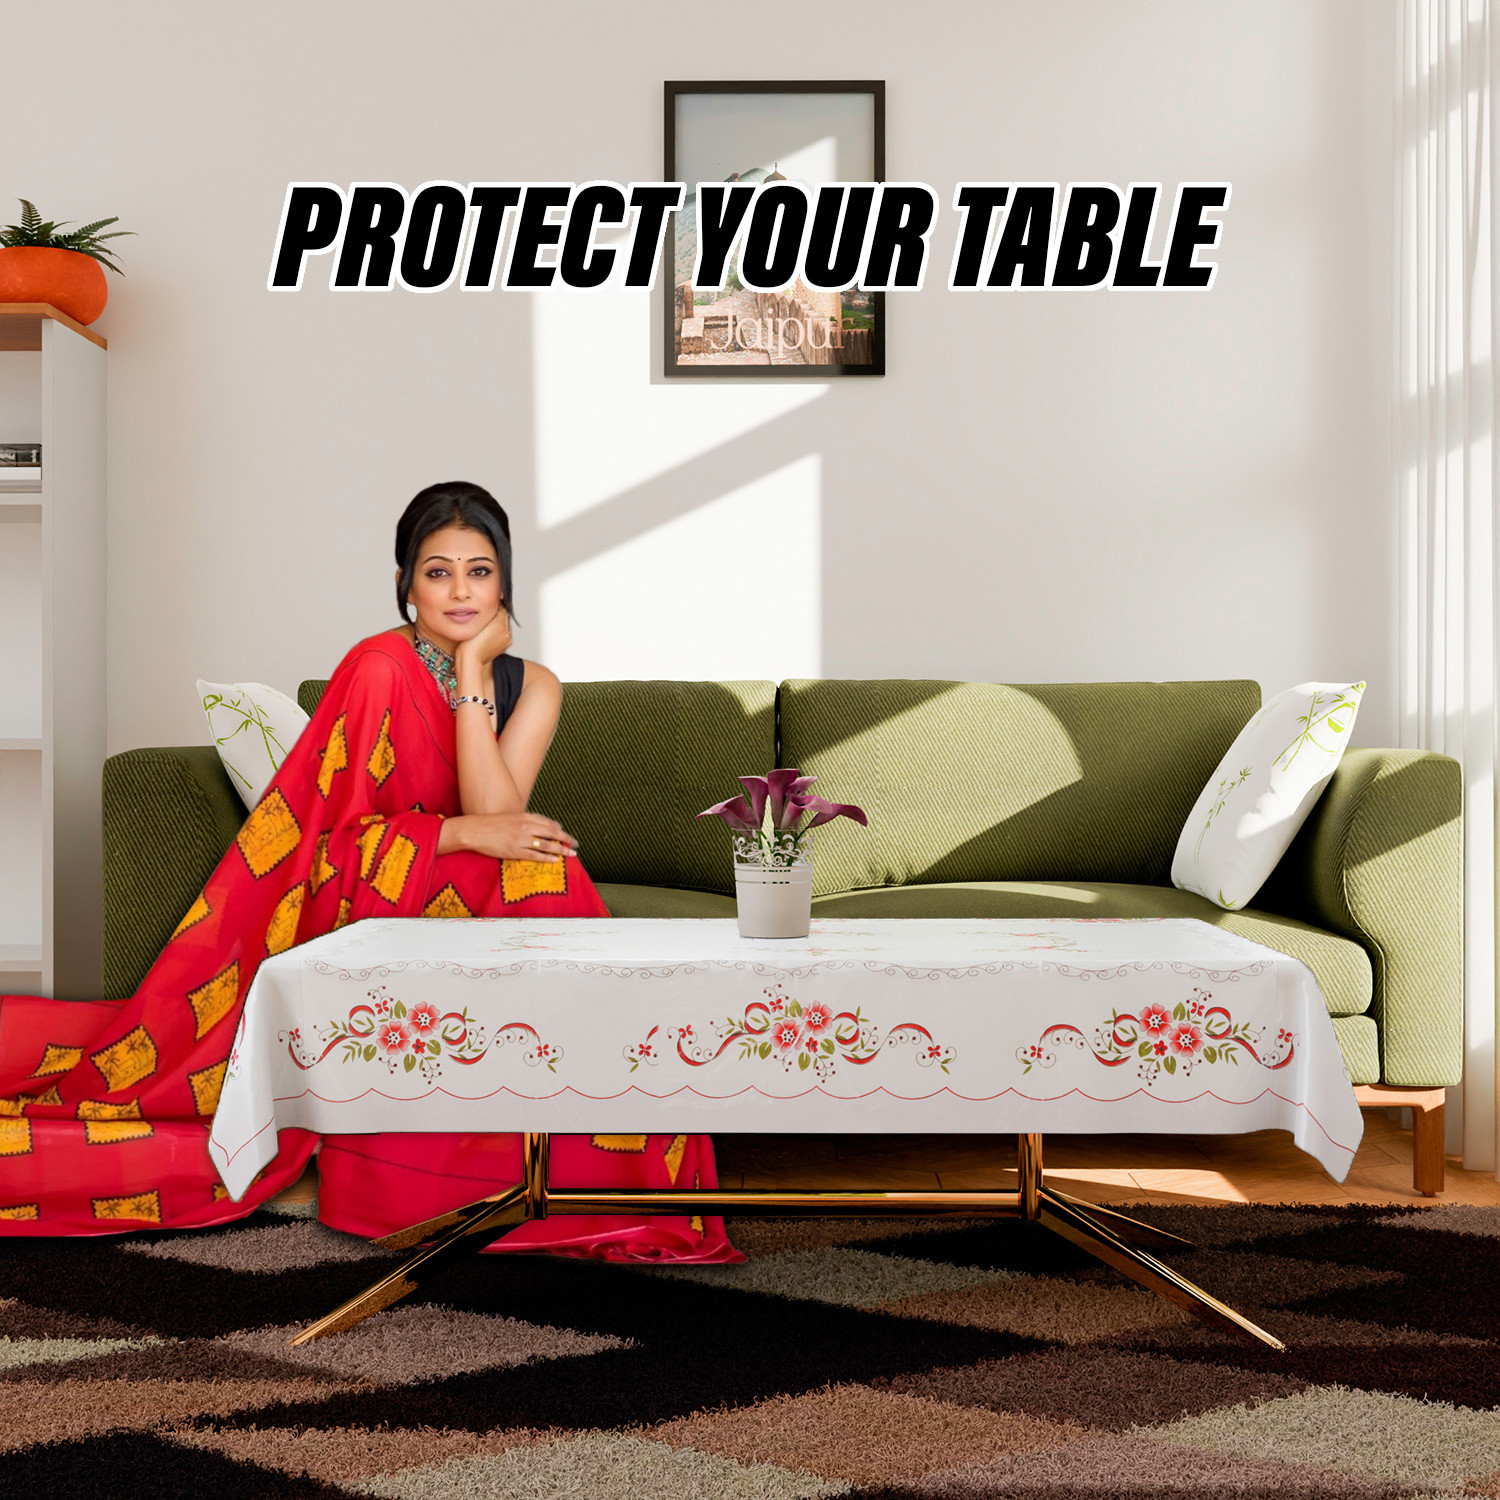 Kuber Industries Center Table Cover | Alloy PVC Flower Center Table Cover | Luxurious Table Protector for Everyday Use | 40x60 Inch | White & Red